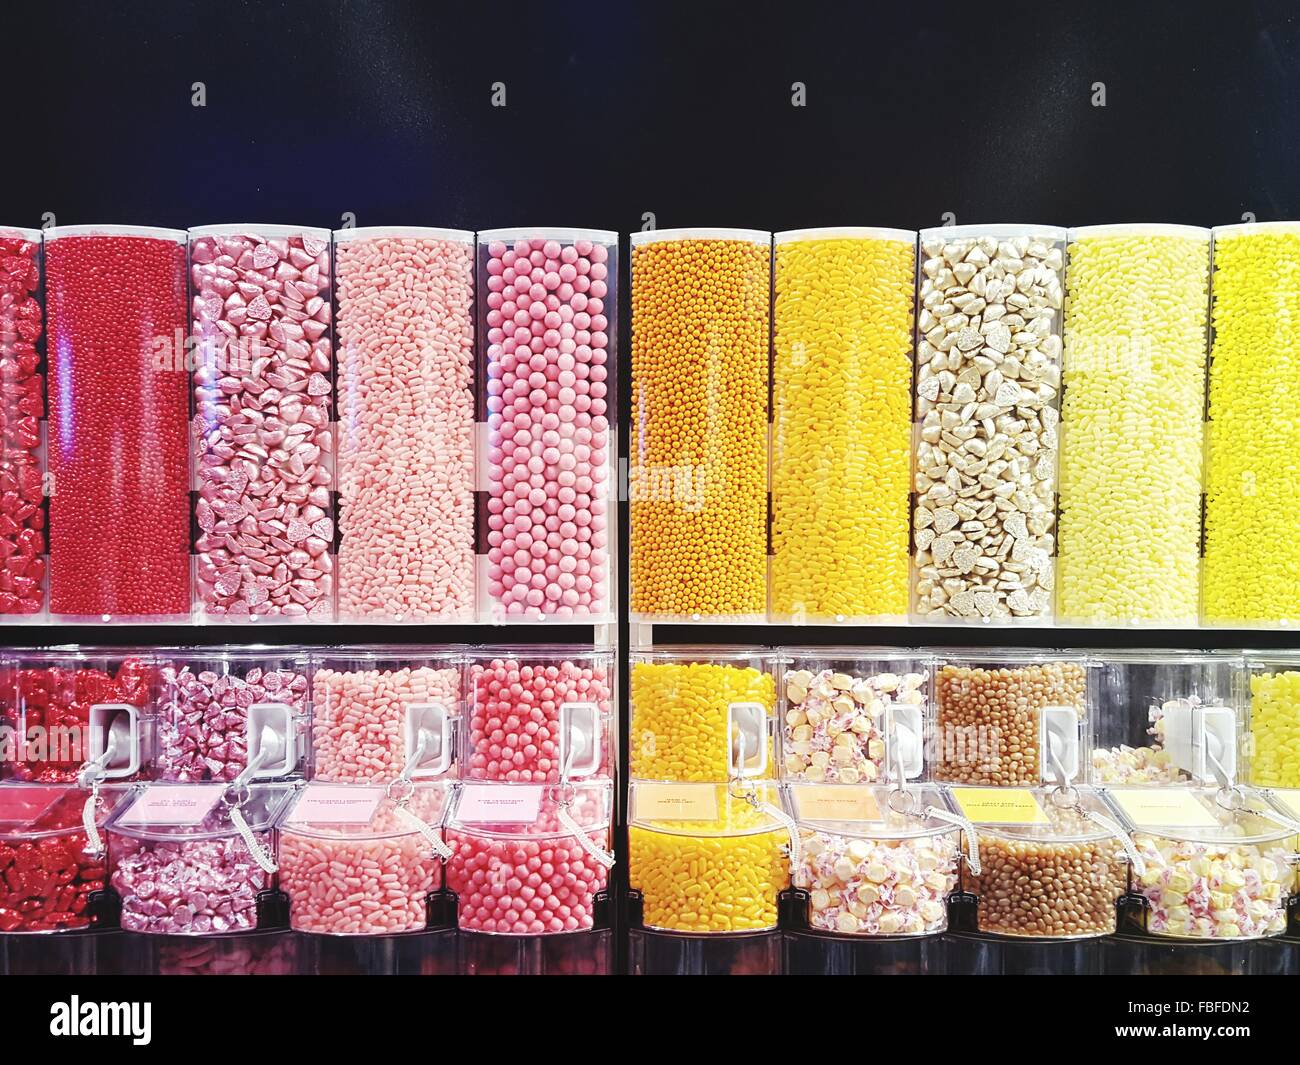 Row Of Candy Dispensers At Store Stock Photo